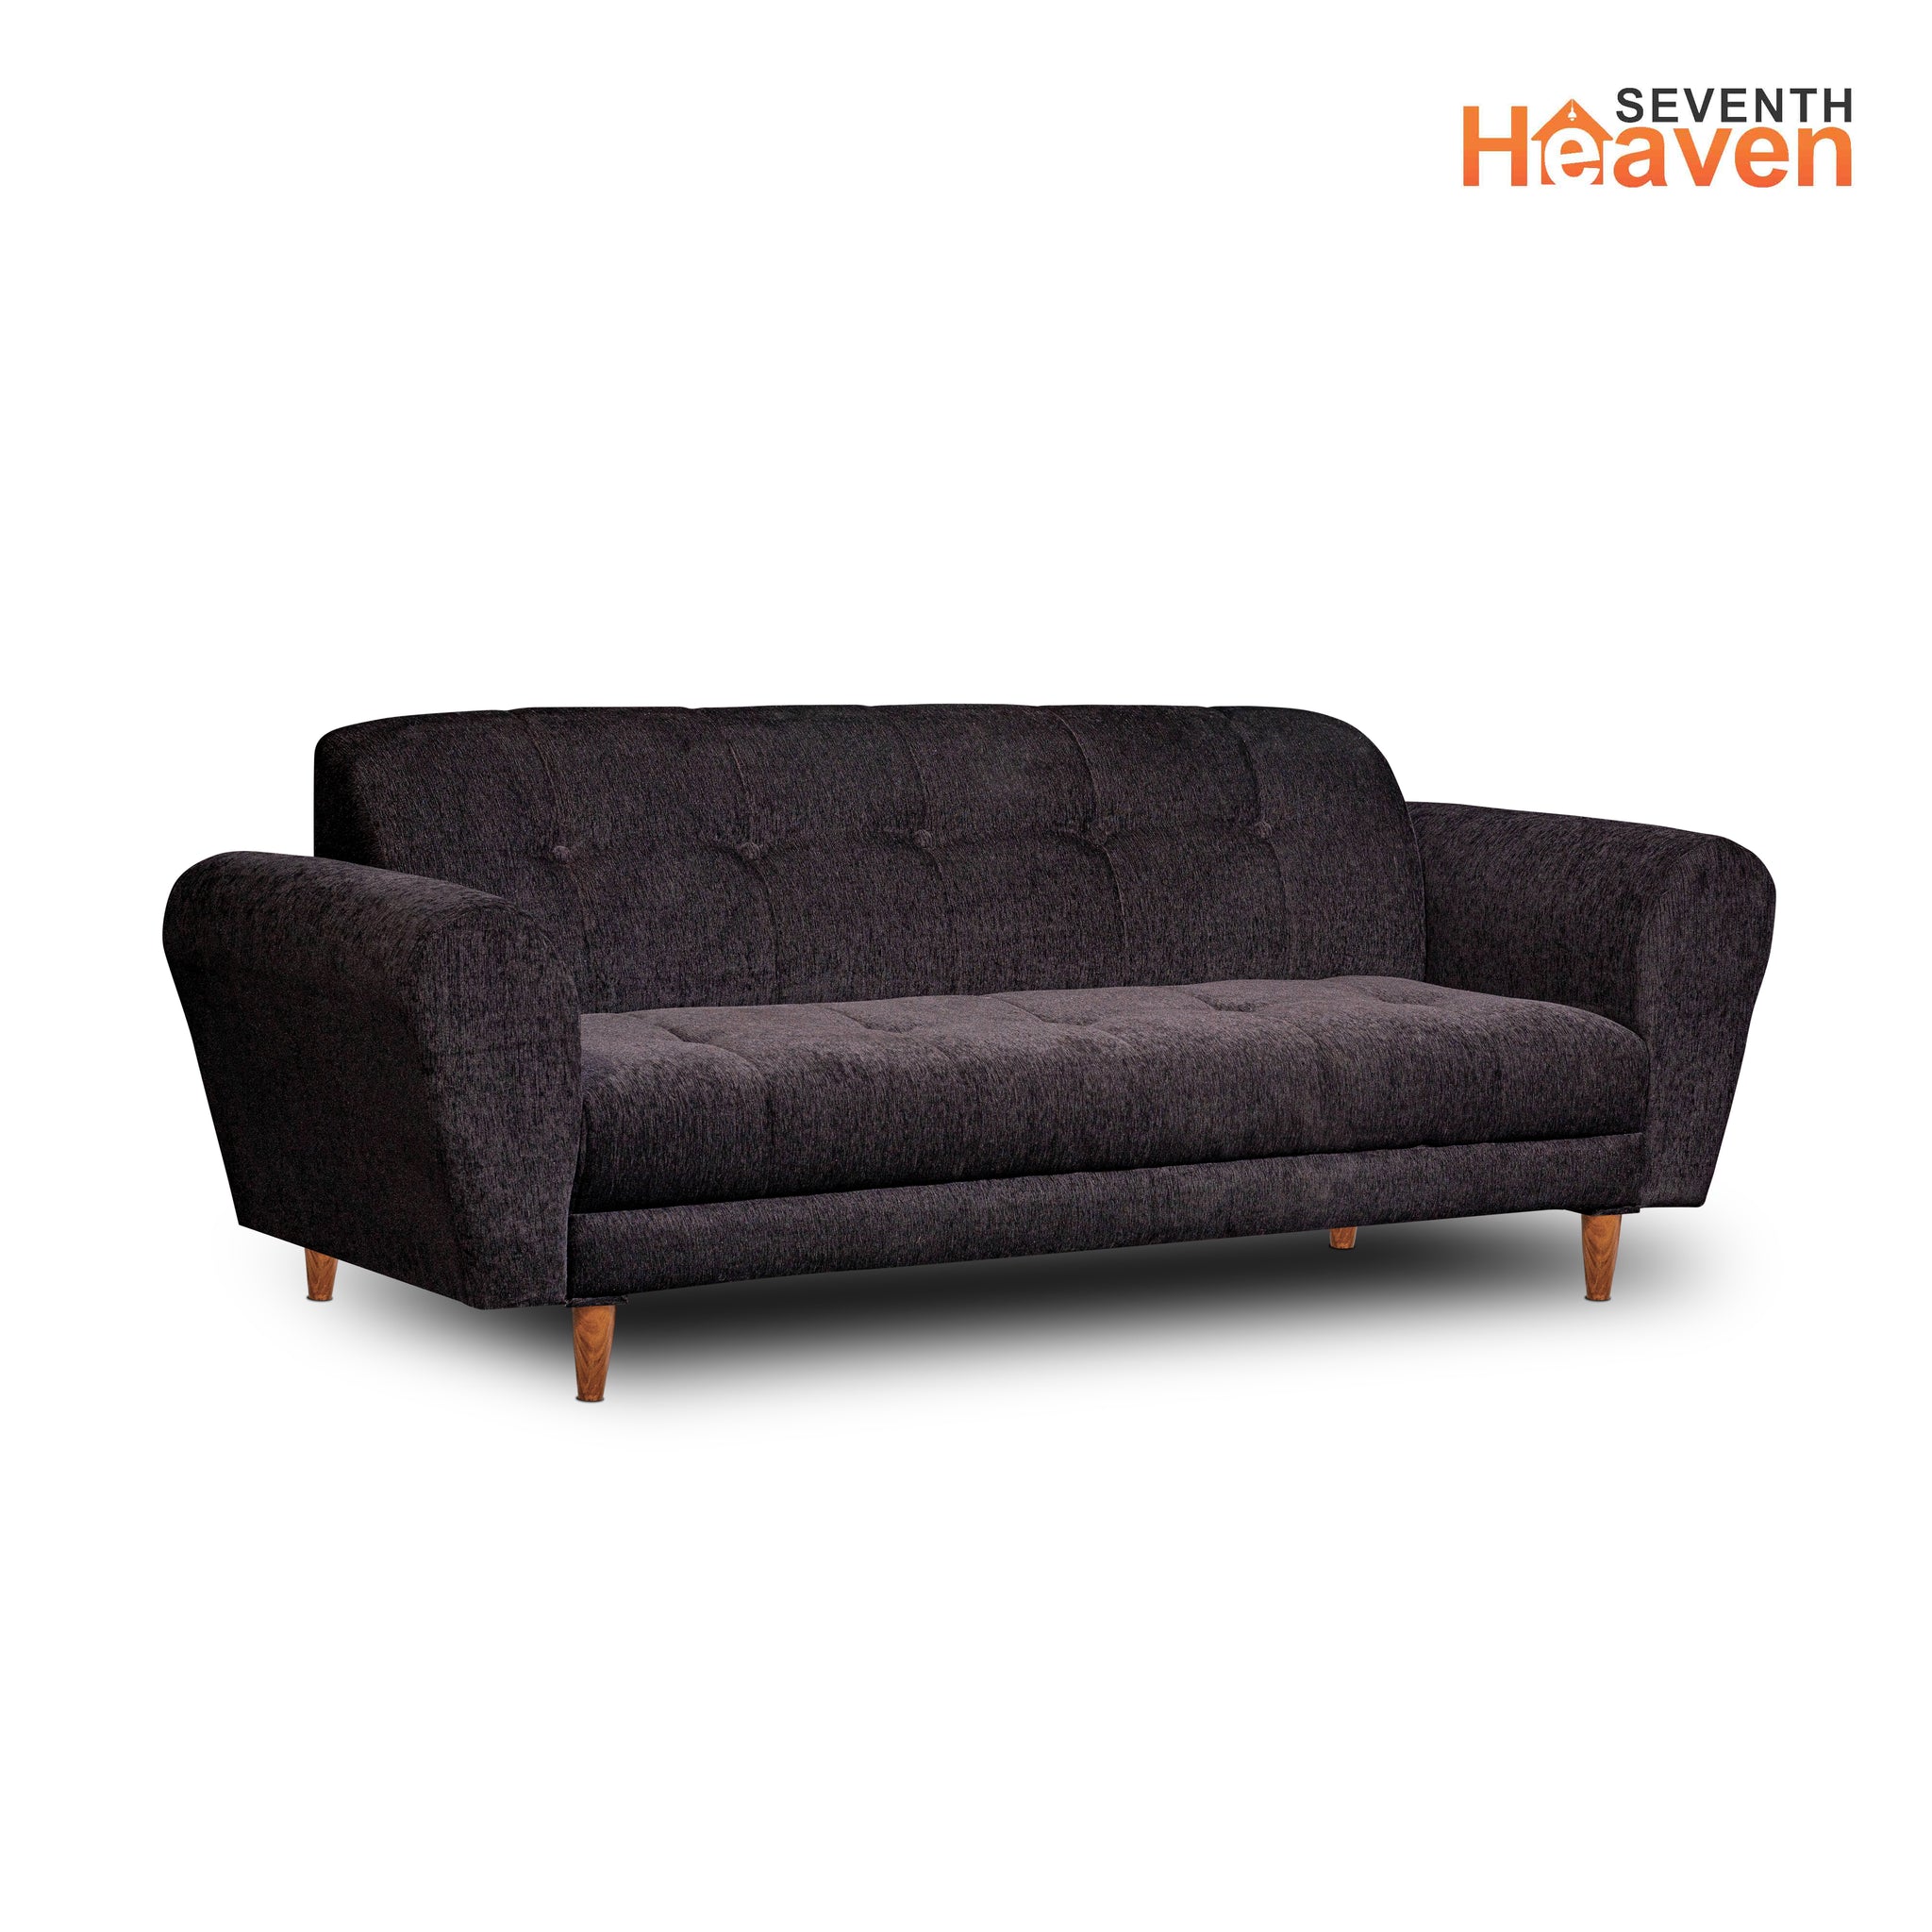 Seventh Heaven Milan 3 Seater Wooden Sofa Set Modern & Elegant Smart Furniture Range for luxurious homes, living rooms and offices. Black Colour Molphino fabric with sheesham polished wooden legs.